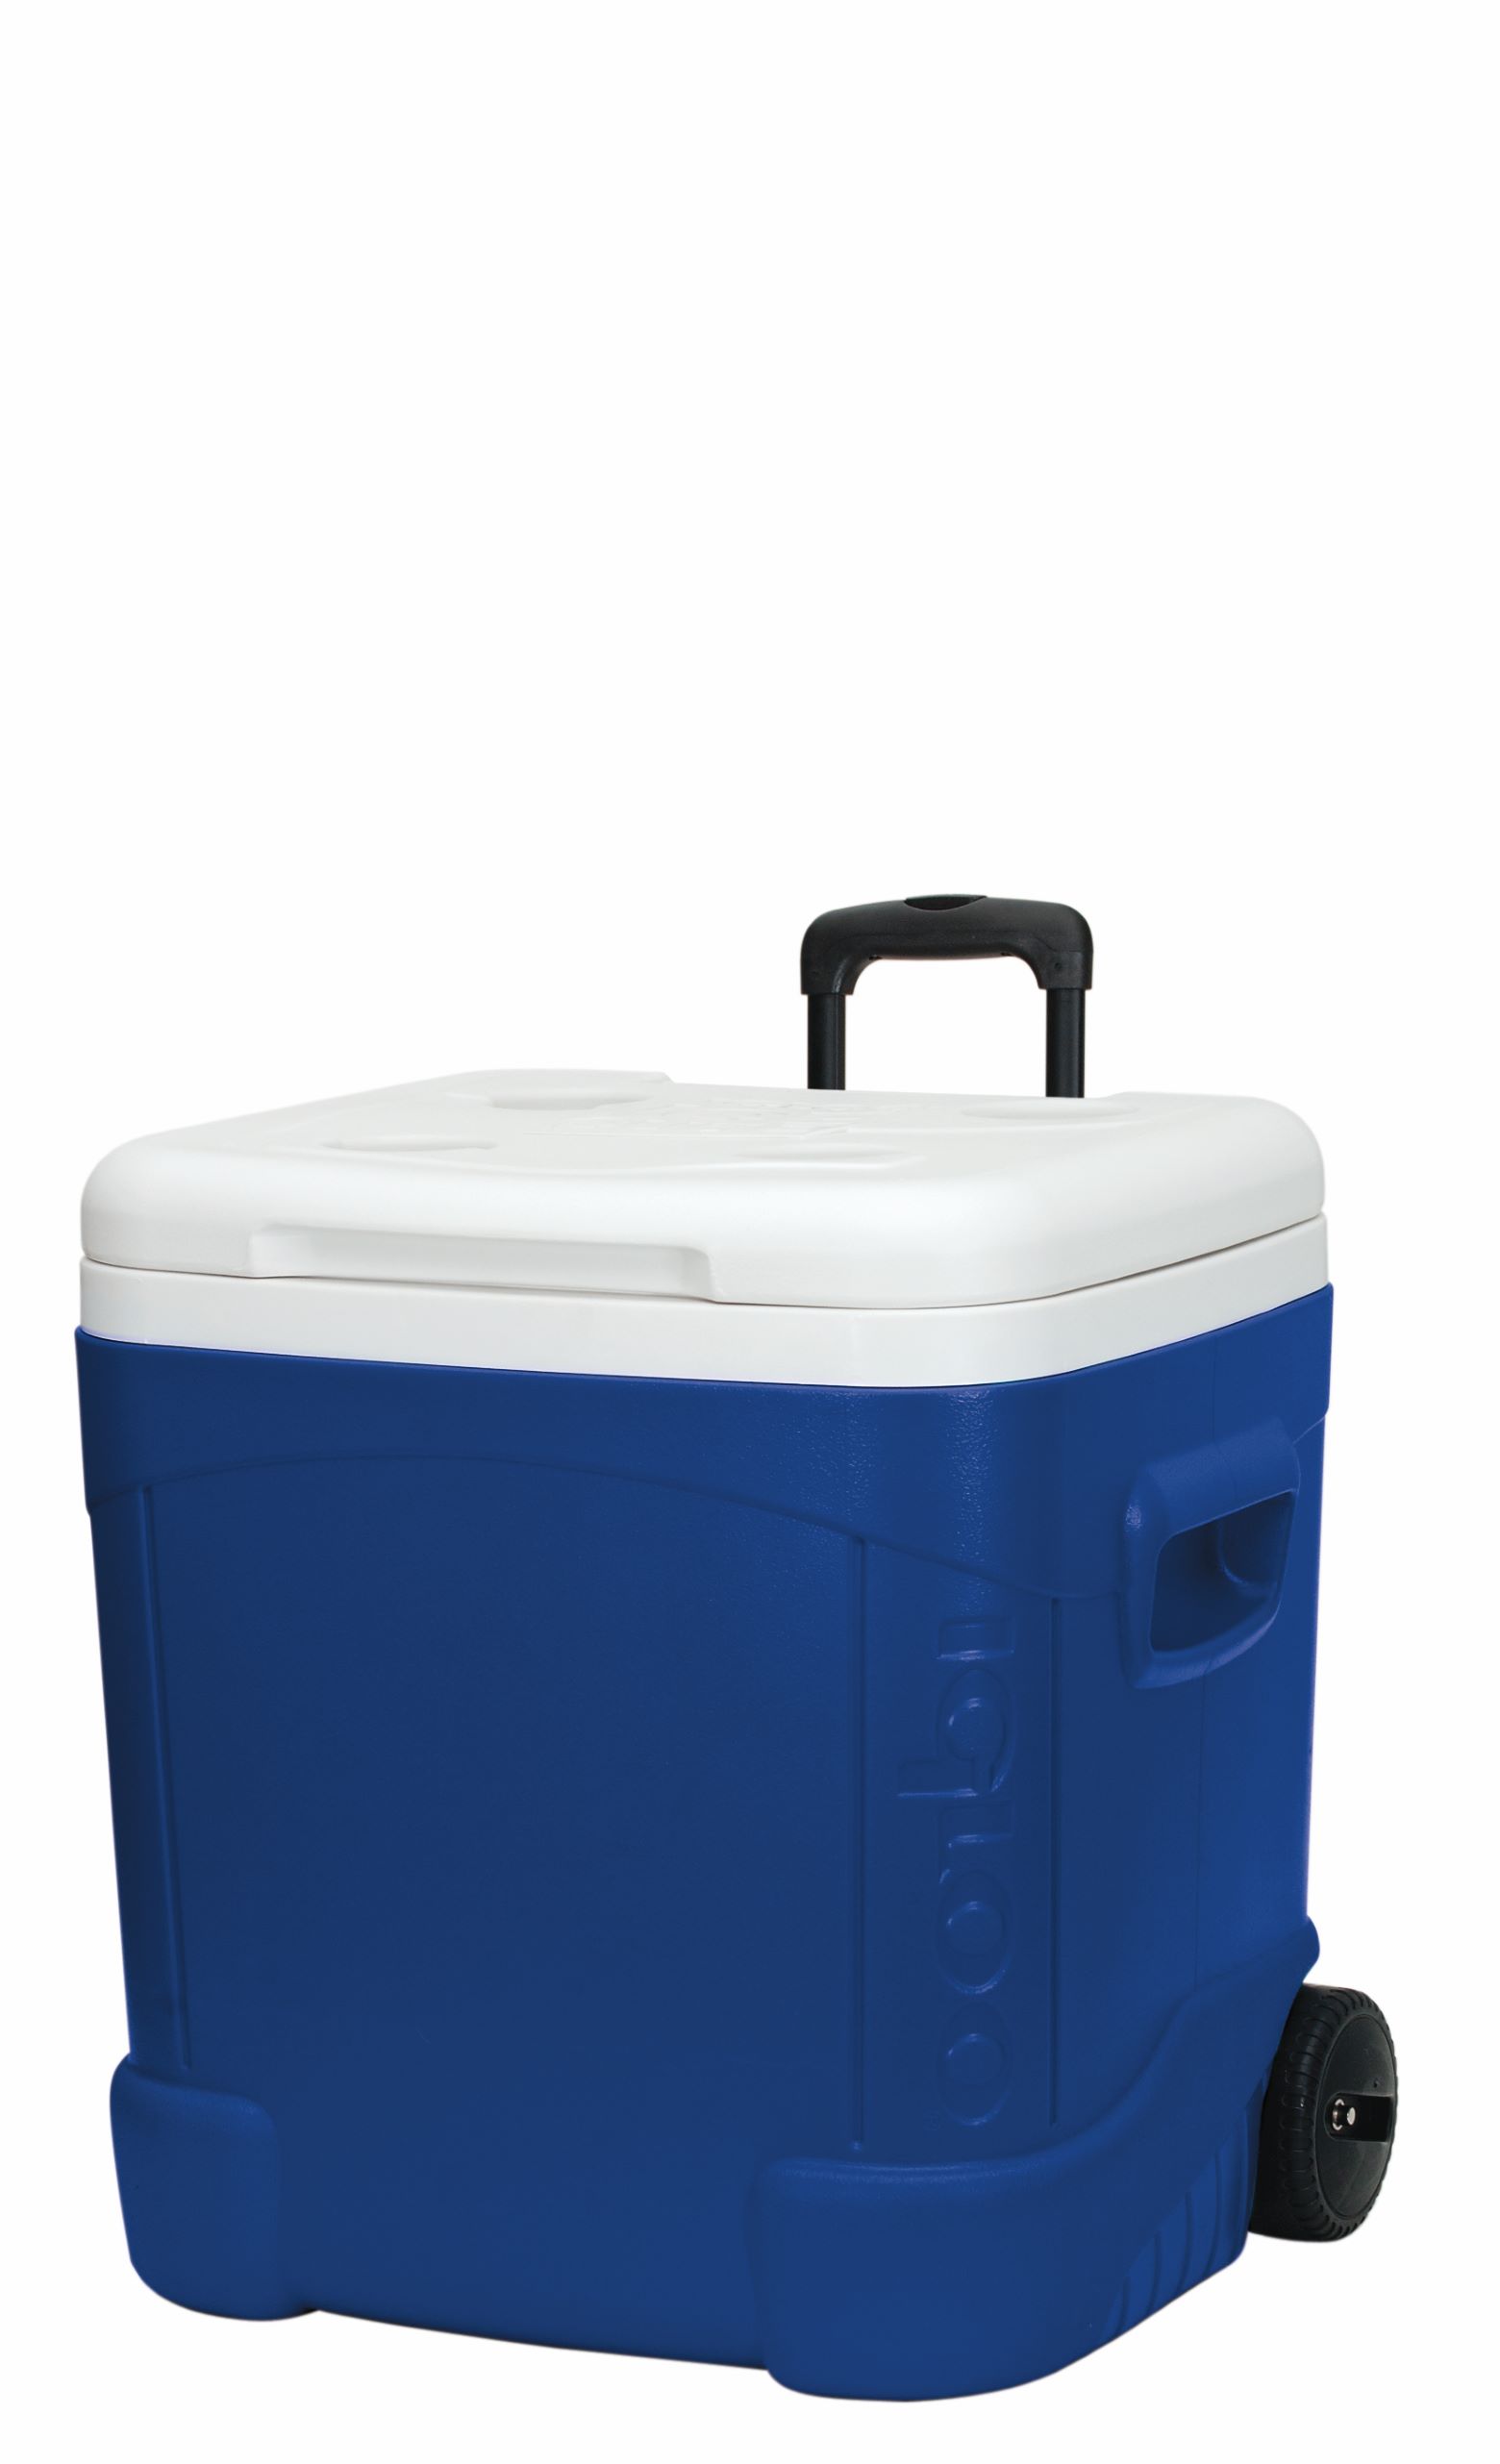 Igloo 60-Quart Ice Cube Roller Cooler - image 3 of 11